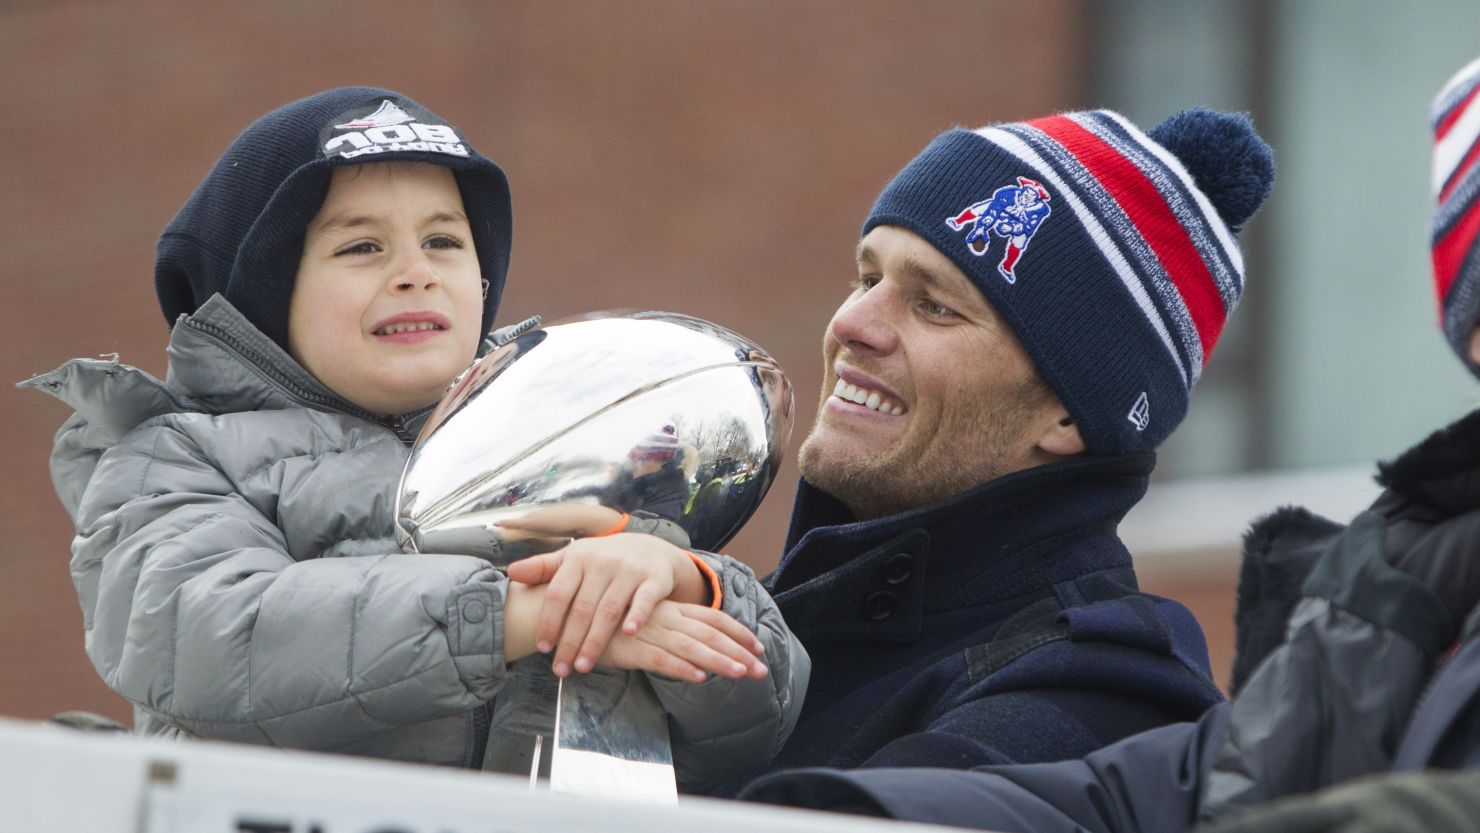 Benjamin Brady, left, holds the Lombardi trophy next to his dad, Patriots quarterback Tom Brady, on a duck boat during the New England Patriots victory parade February 4 in Boston.